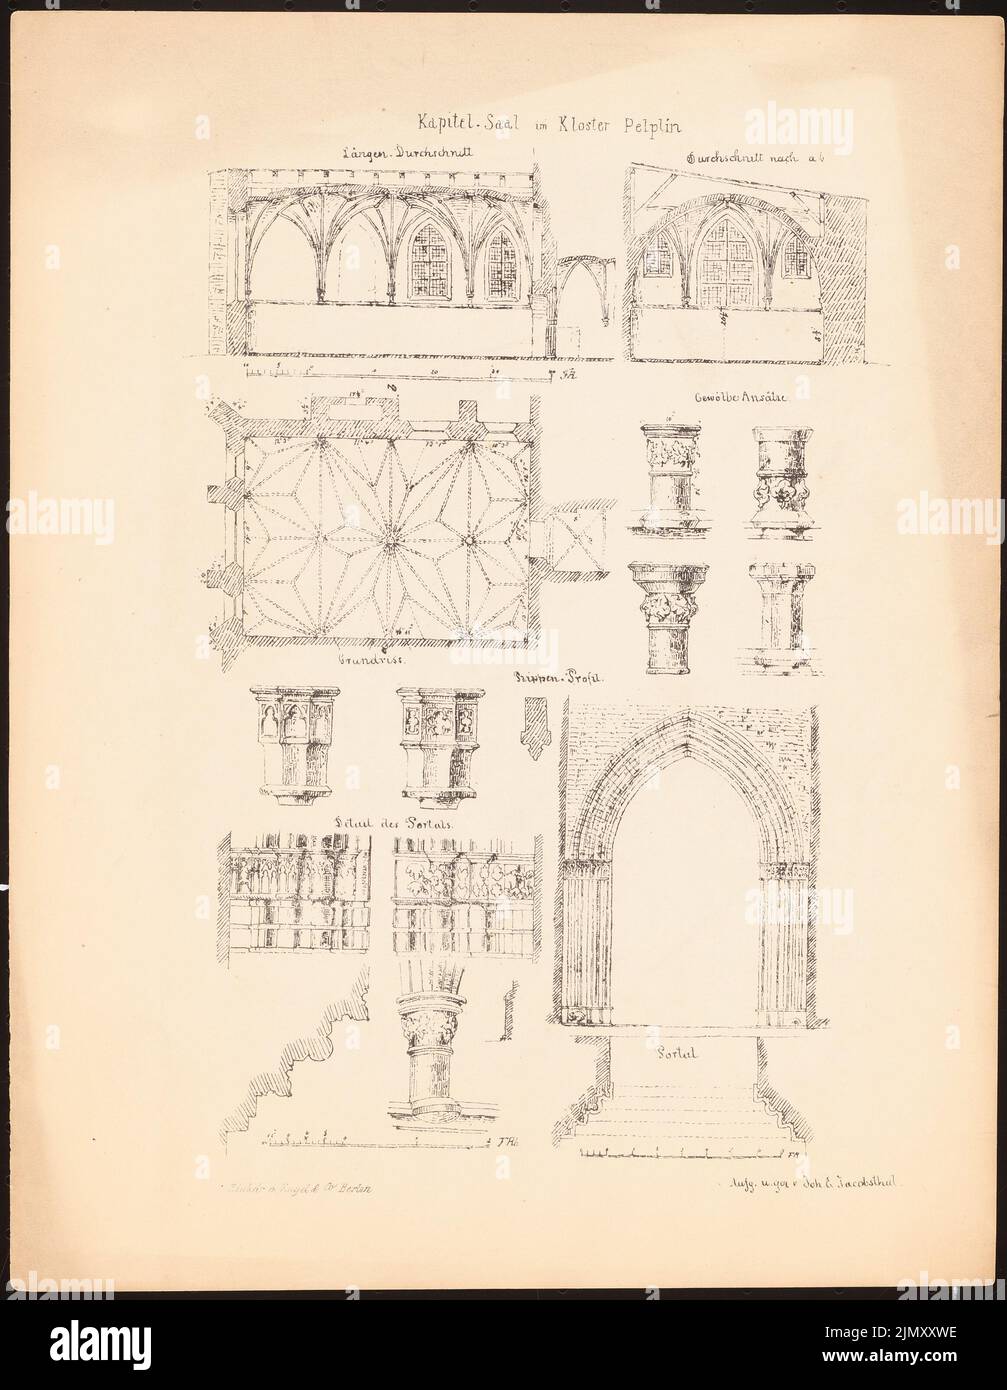 Jacobsthal Johann Eduard (1839-1902), monastery church, pelplin. (From: Architect. And Techn. Travel sketches from East and West Prussia, Study Travel Arch.verein Berlin 1858) (1858-1858): Longitudinal section, floor plan, details chapter hall. Pressure on paper, 34 x 26.4 cm (including scan edges) Stock Photo